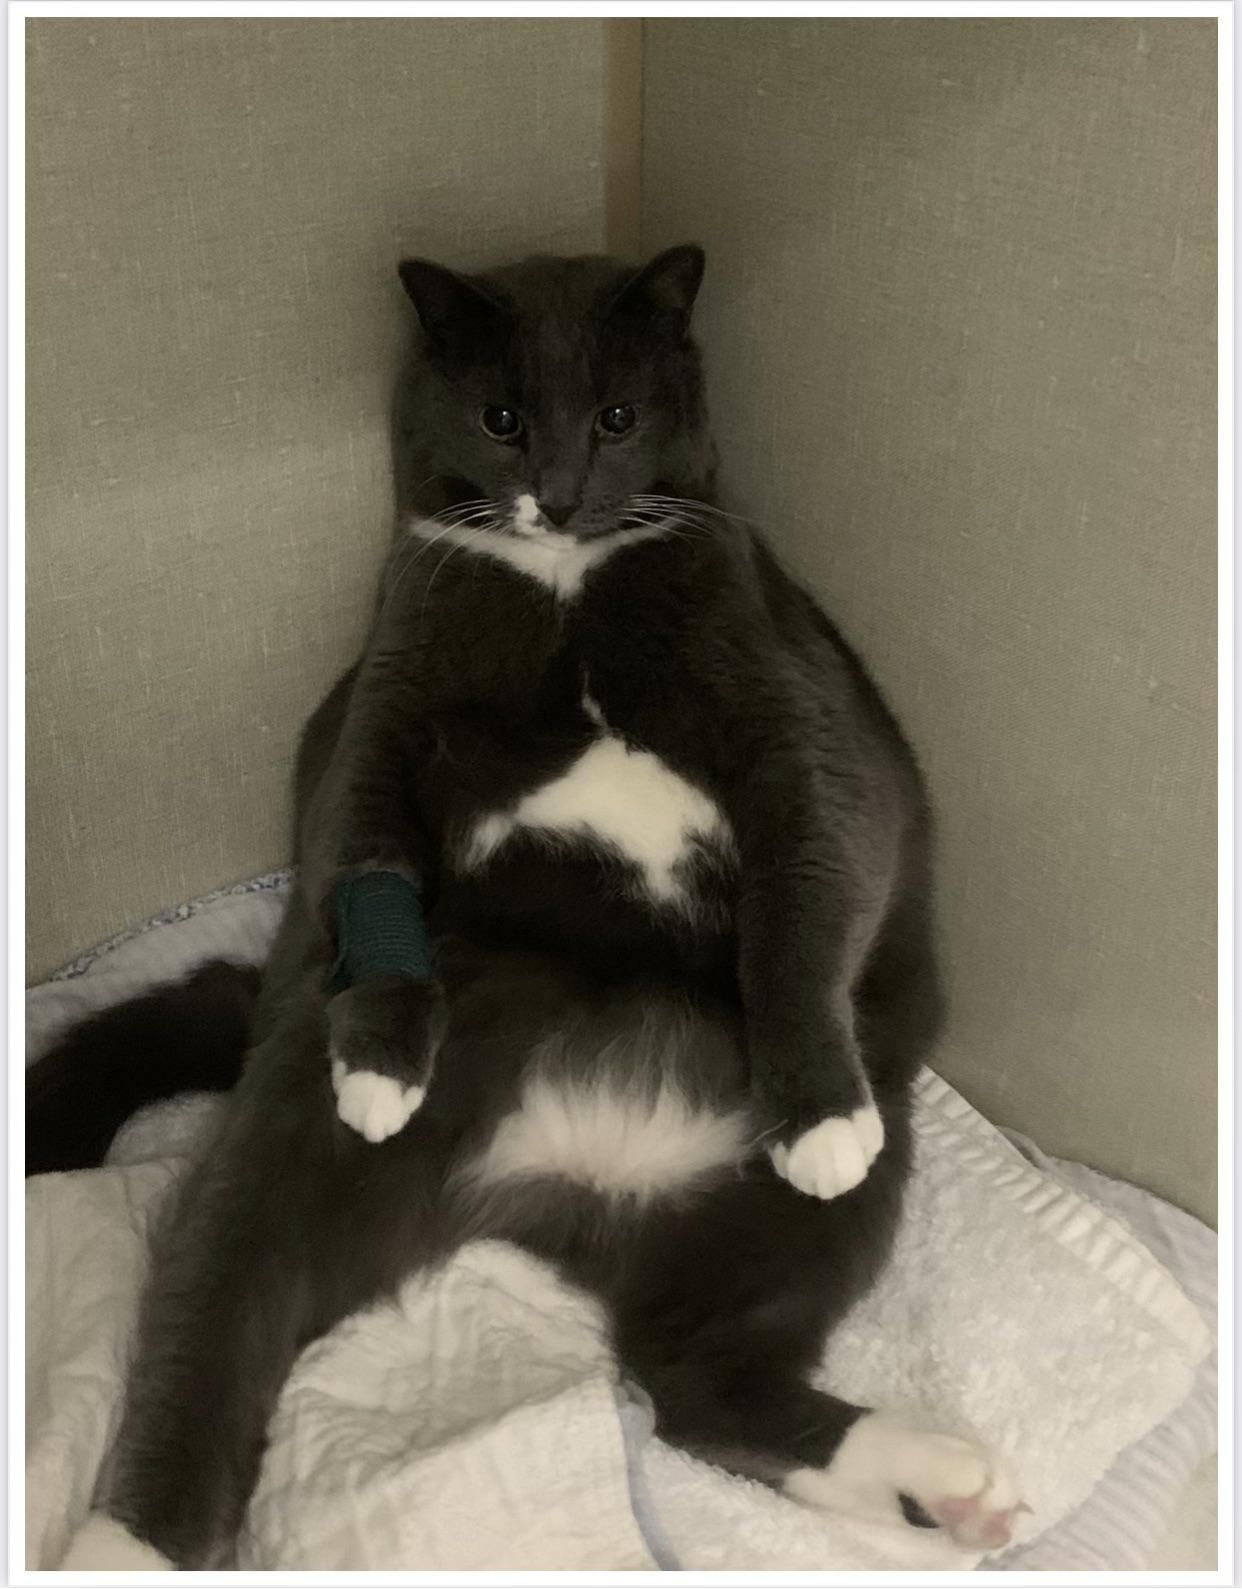 The vet called and asked if they could use a pic of our cat for marketing purposes while he was in for dental surgery. I said sure! Then they sent the pic…